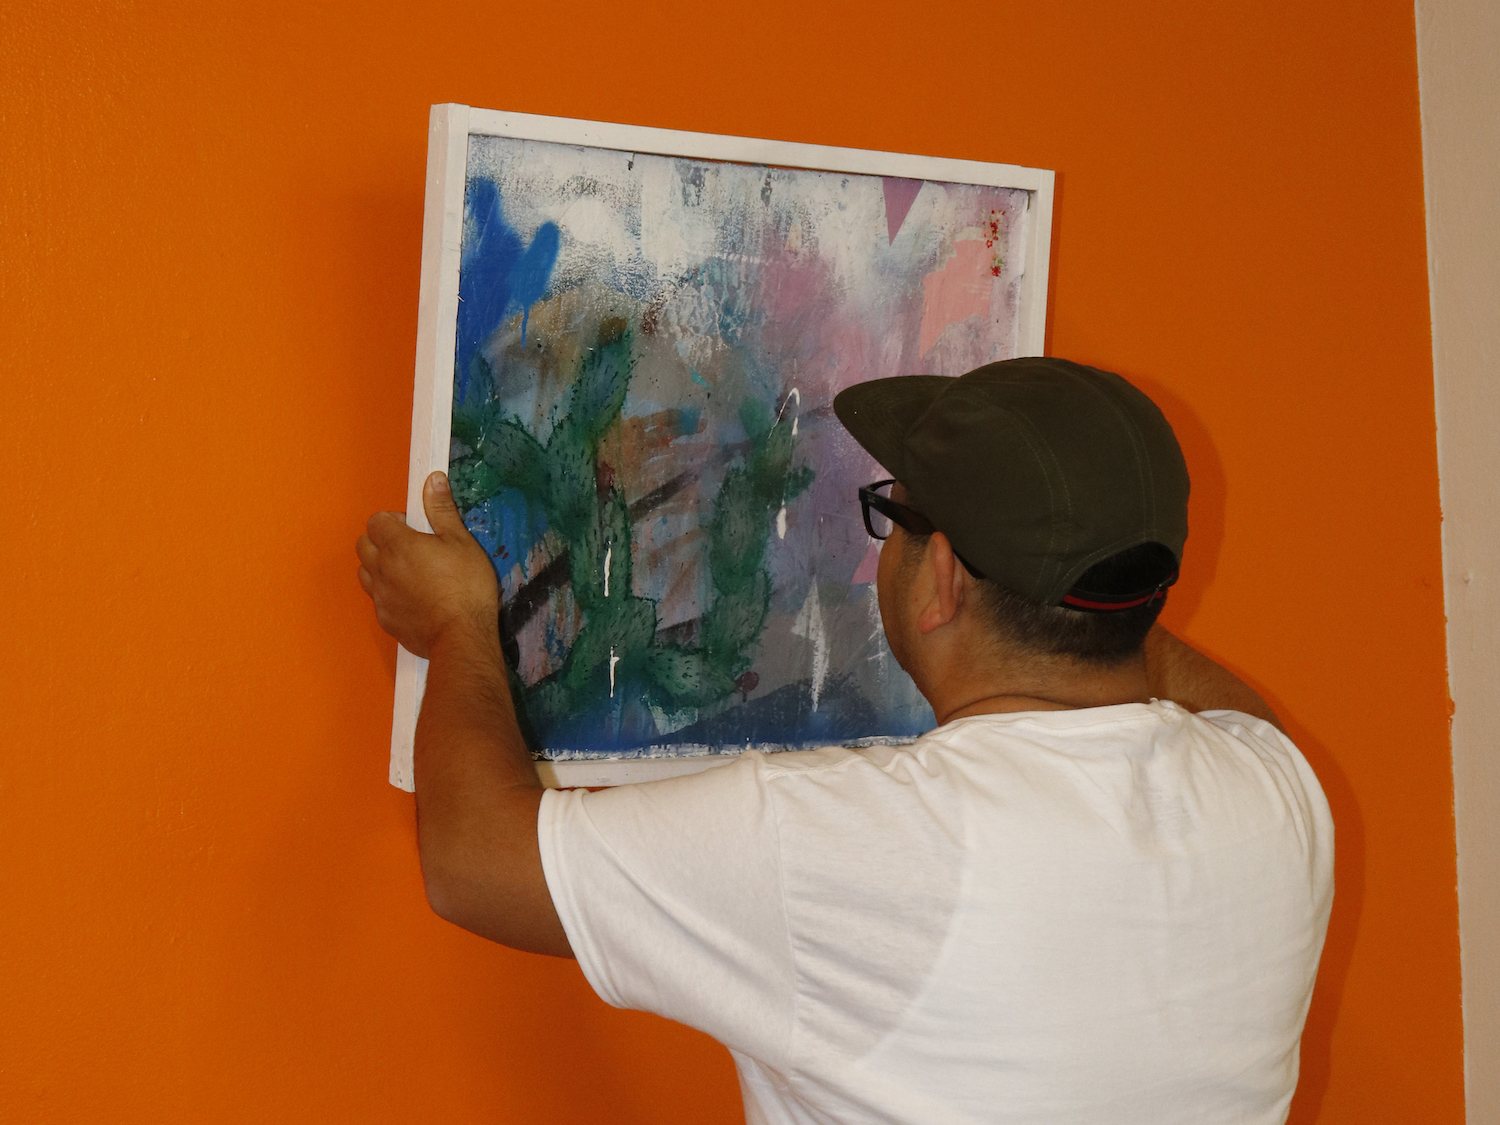 Fernando replacing a painting on the wall.